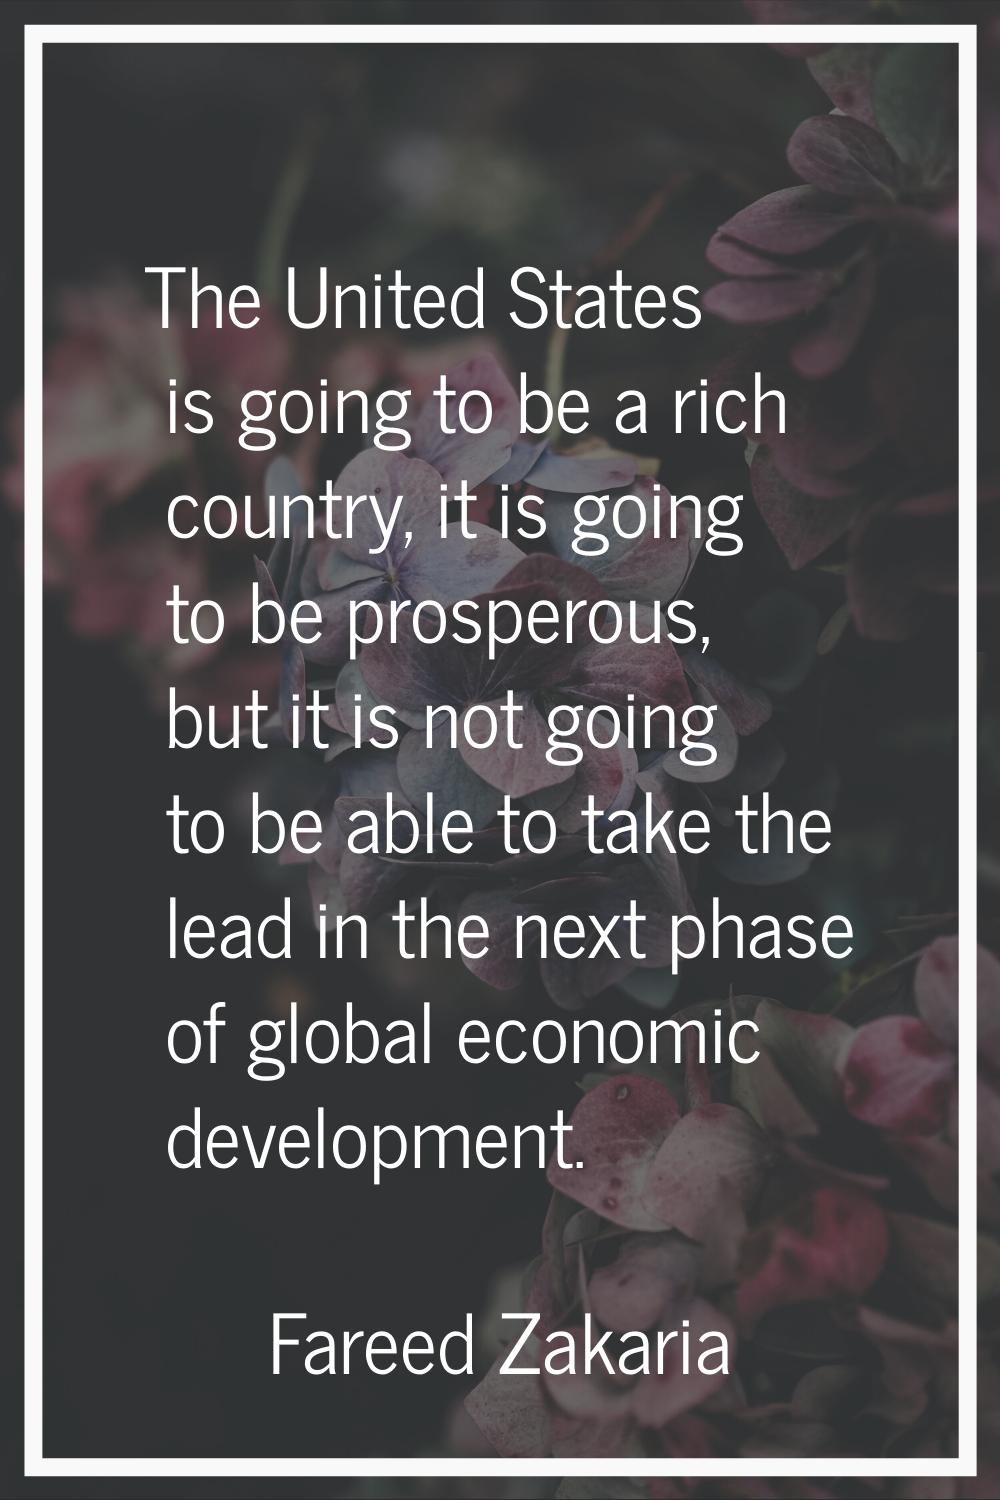 The United States is going to be a rich country, it is going to be prosperous, but it is not going 